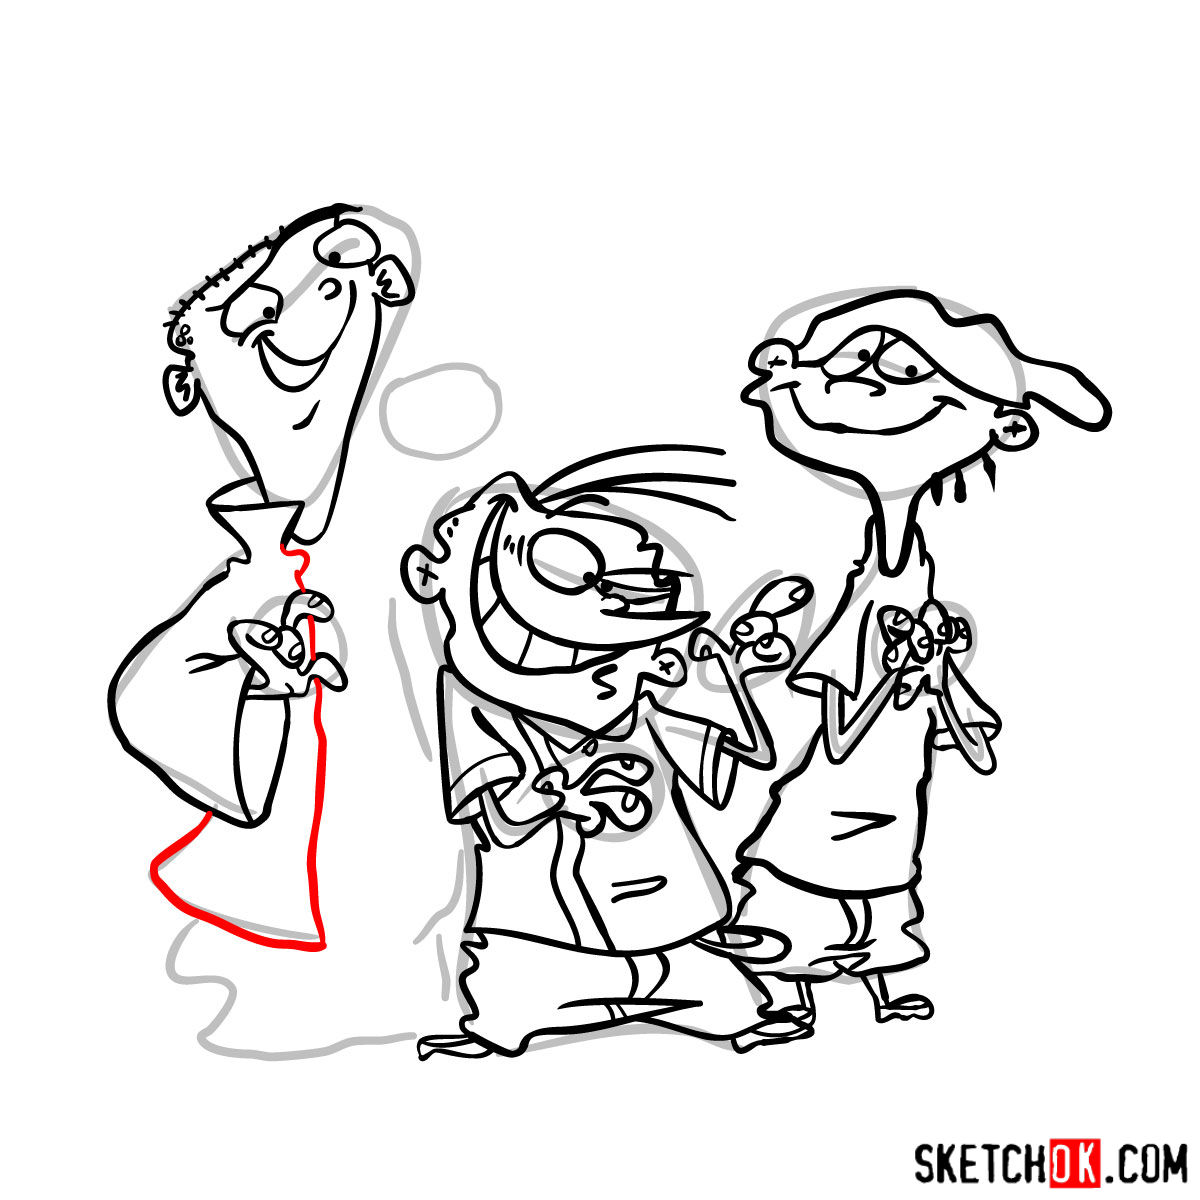 How to draw Ed, Edd and Eddy together - step 25